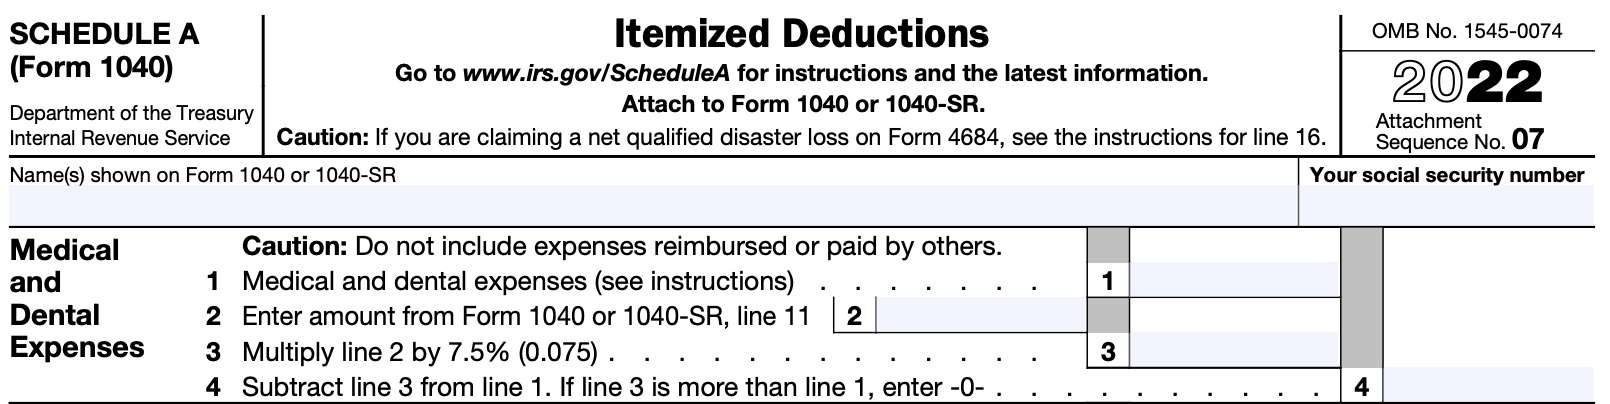 irs schedule a, itemized deductions: medical and dental expenses